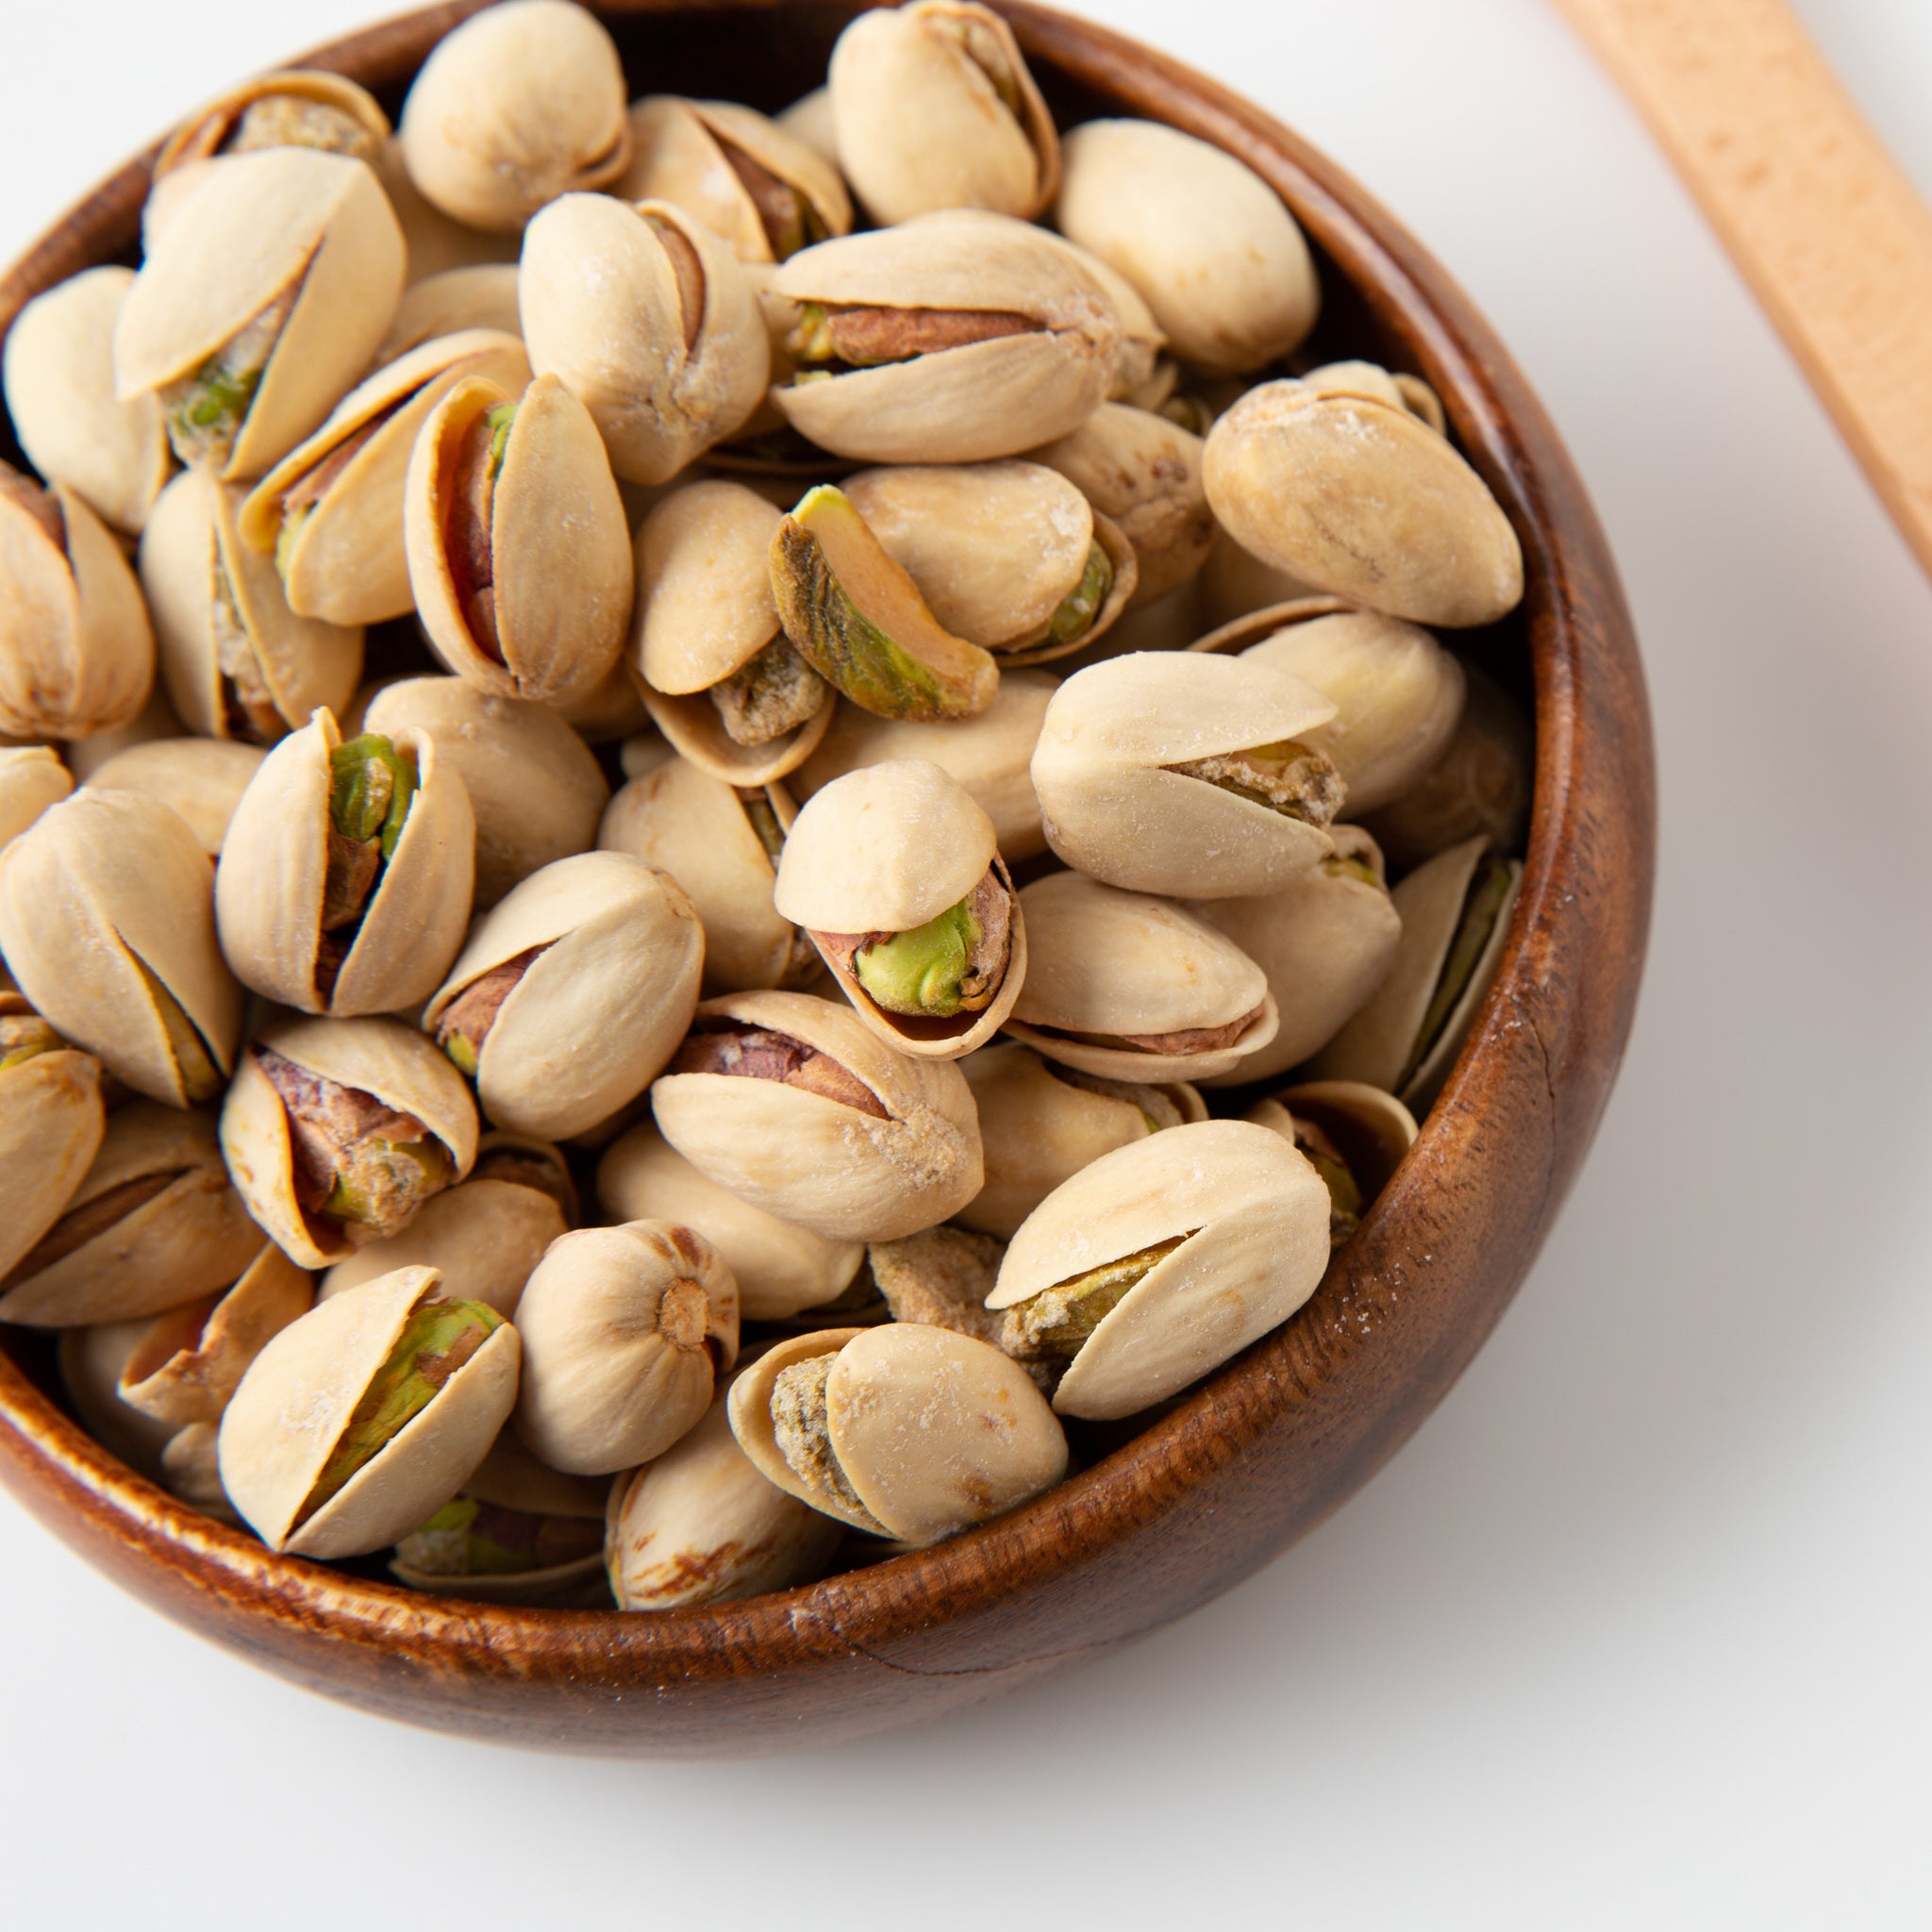 Roasted Salted Pistachios (Roasted Nuts) Image 3 - Naked Foods